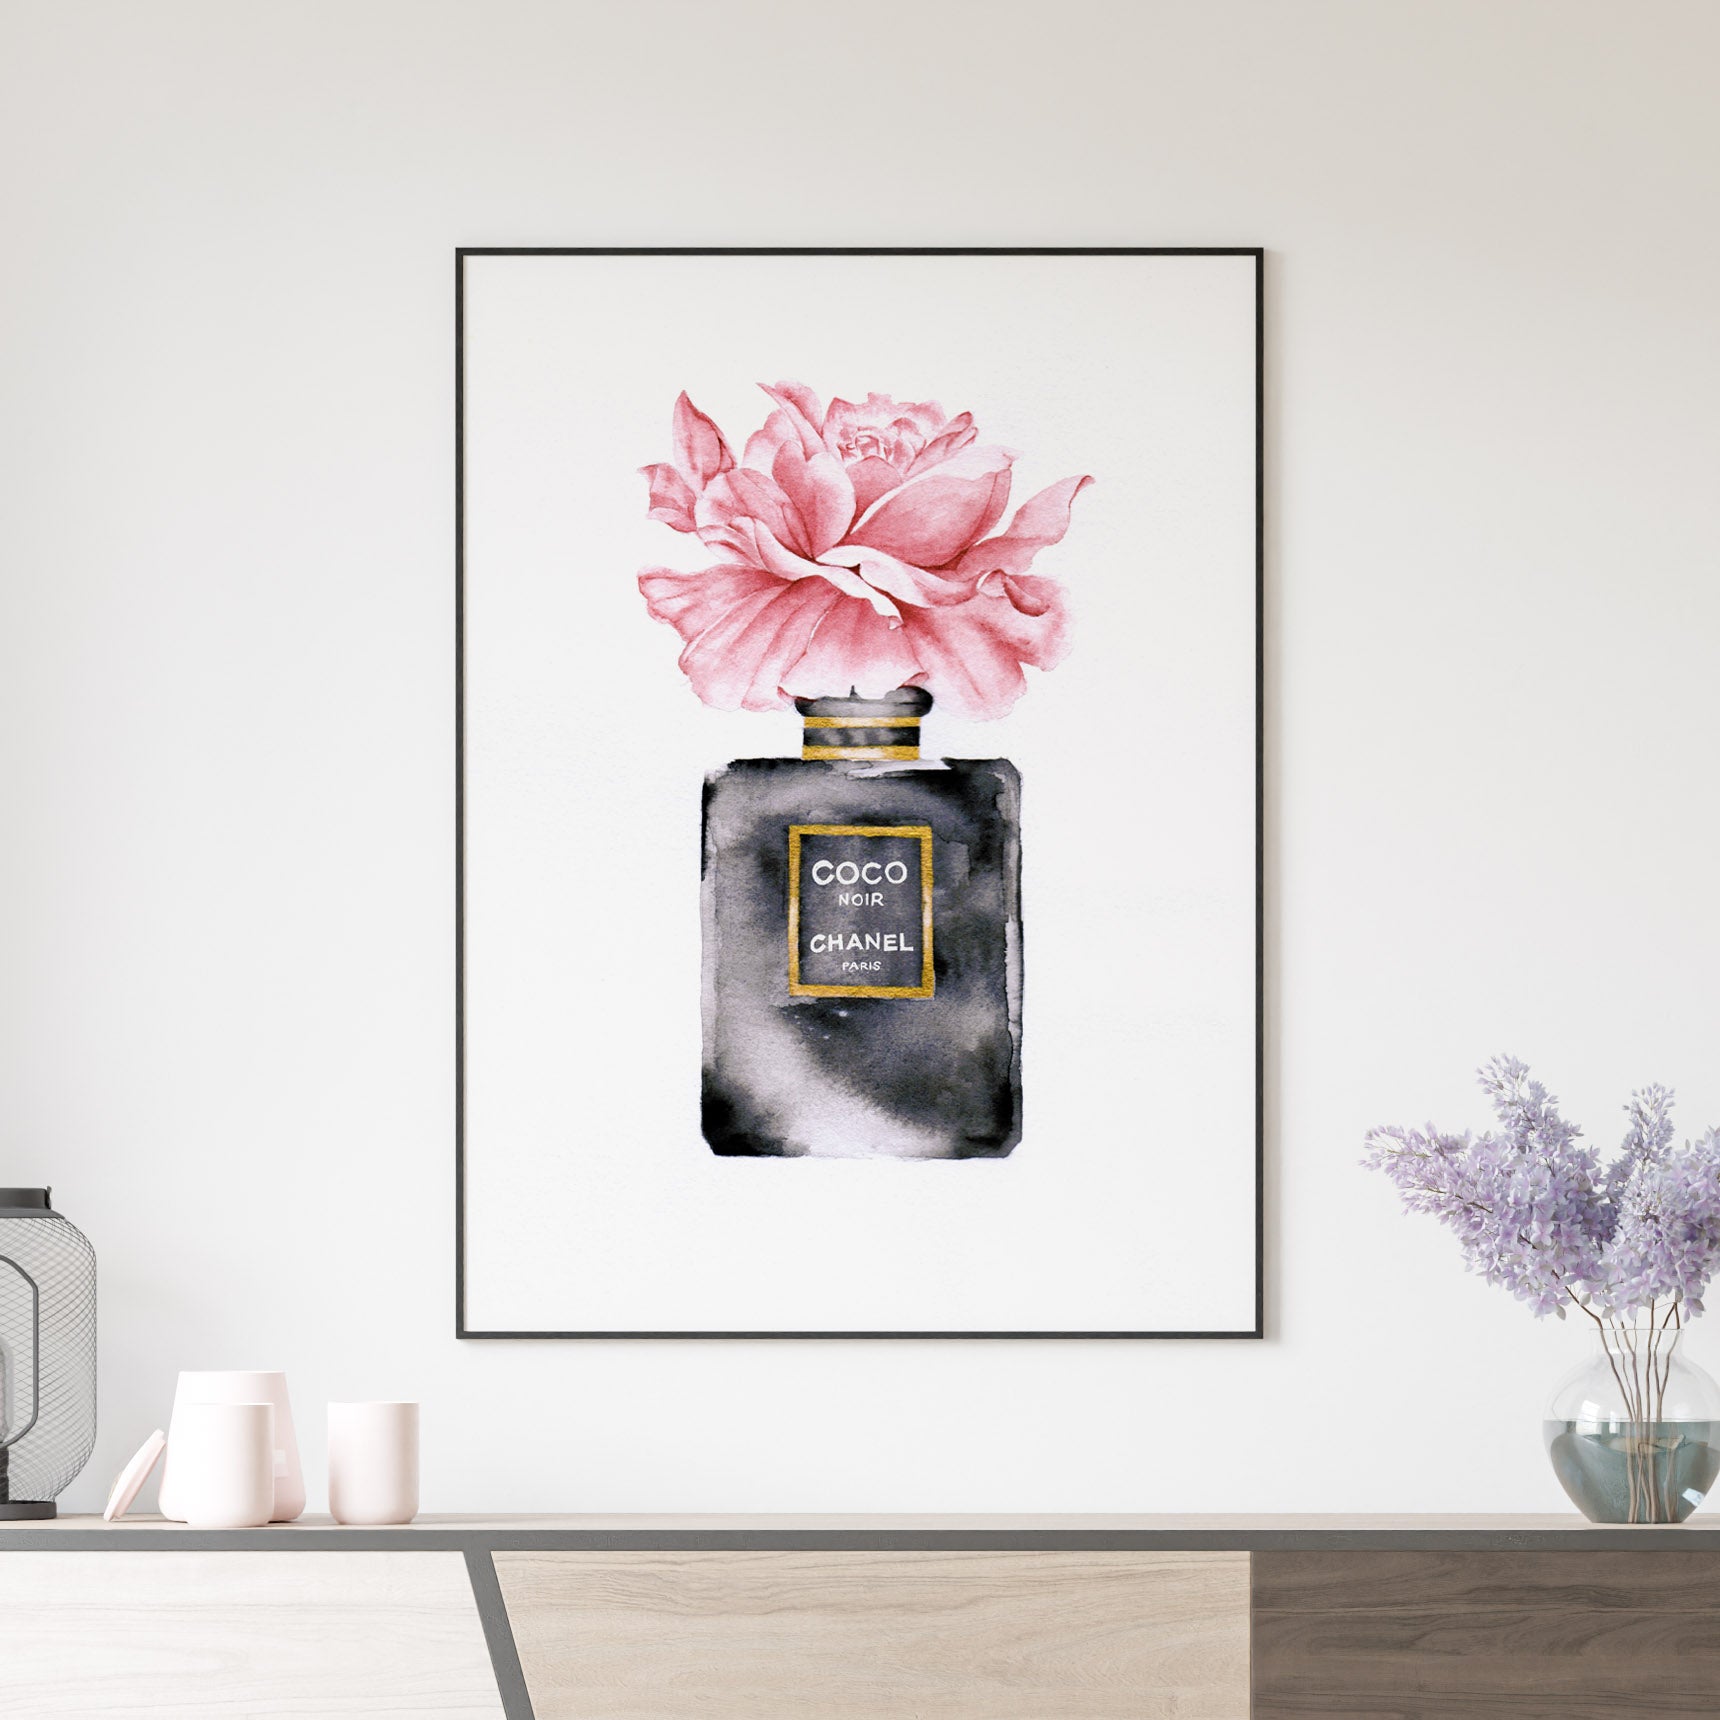 Chanel Paris No 5 Perfume Bottle Canvas Wall Art Home Picture Painting 16  x 20